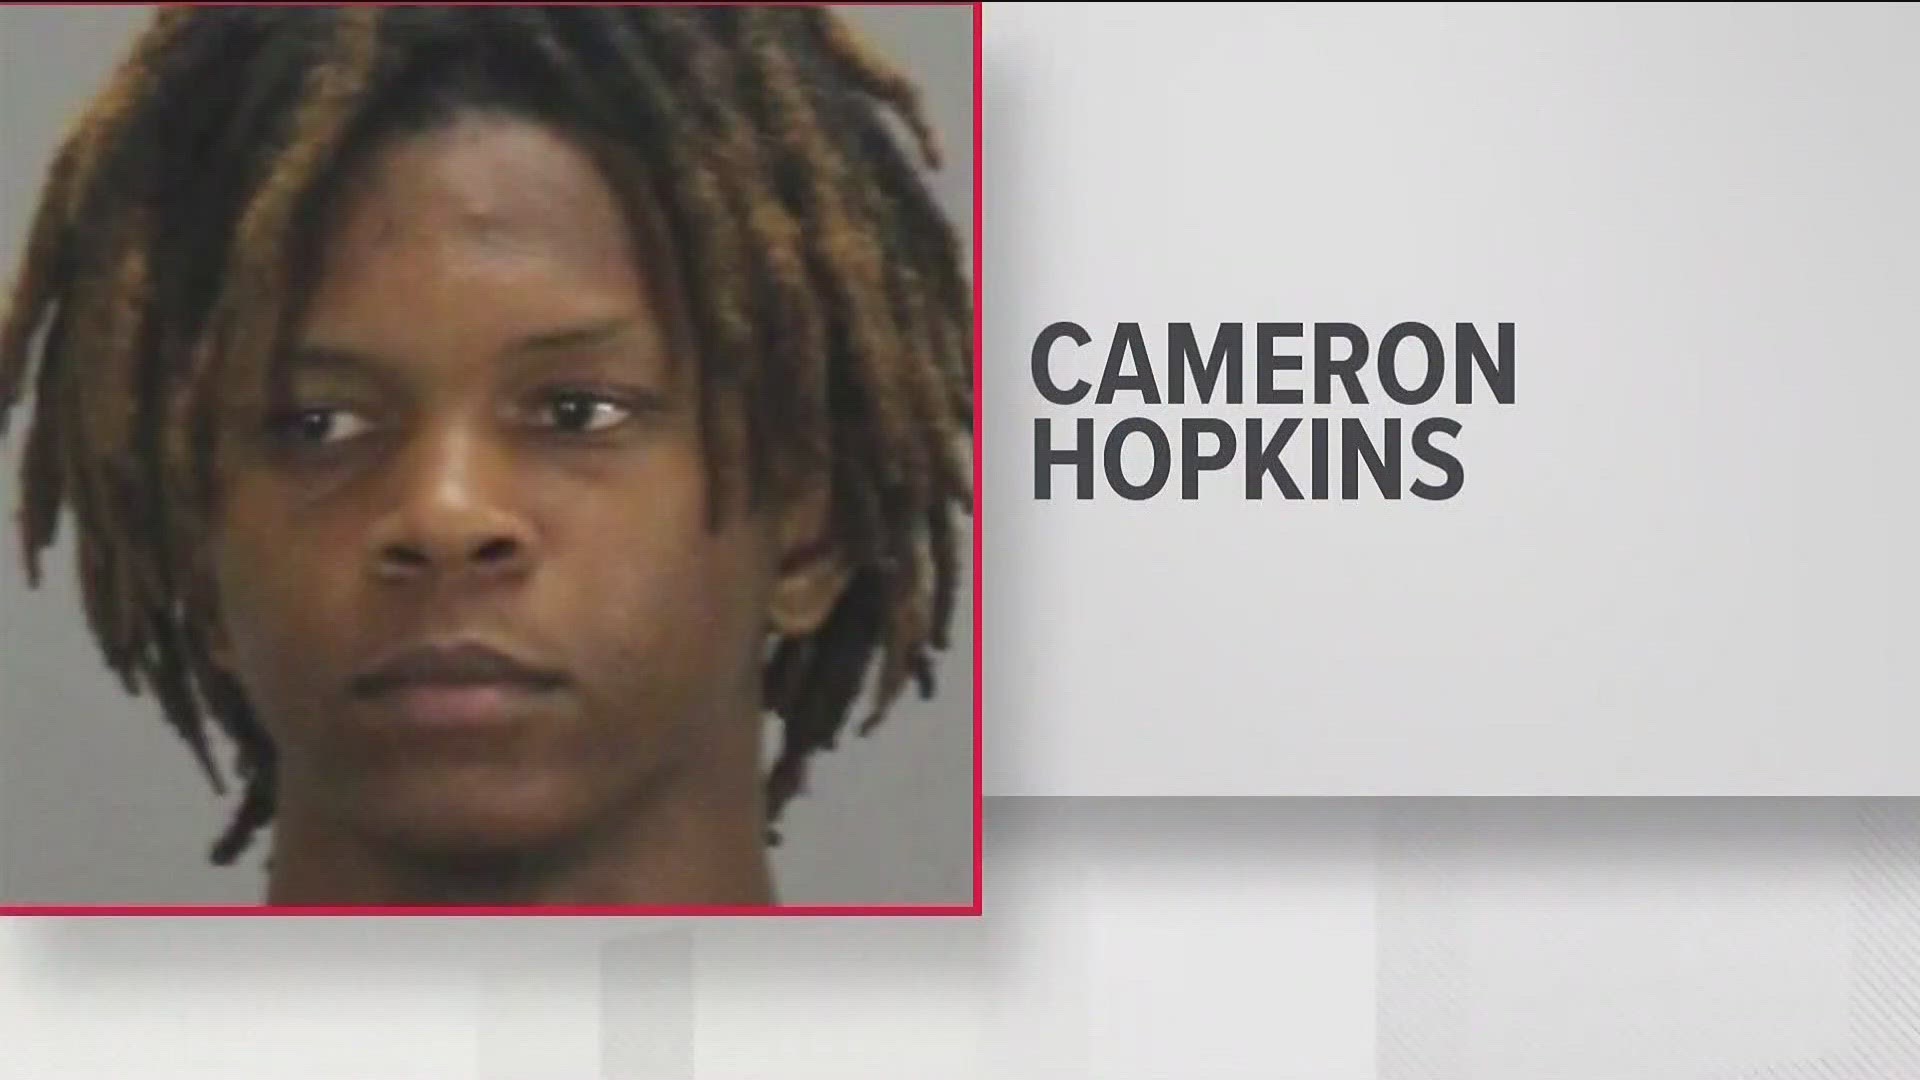 Cameron Hopkins, who is accused of kidnapping his ex-girlfriend Khaliyah Jones and shooting her to death faced a judge.